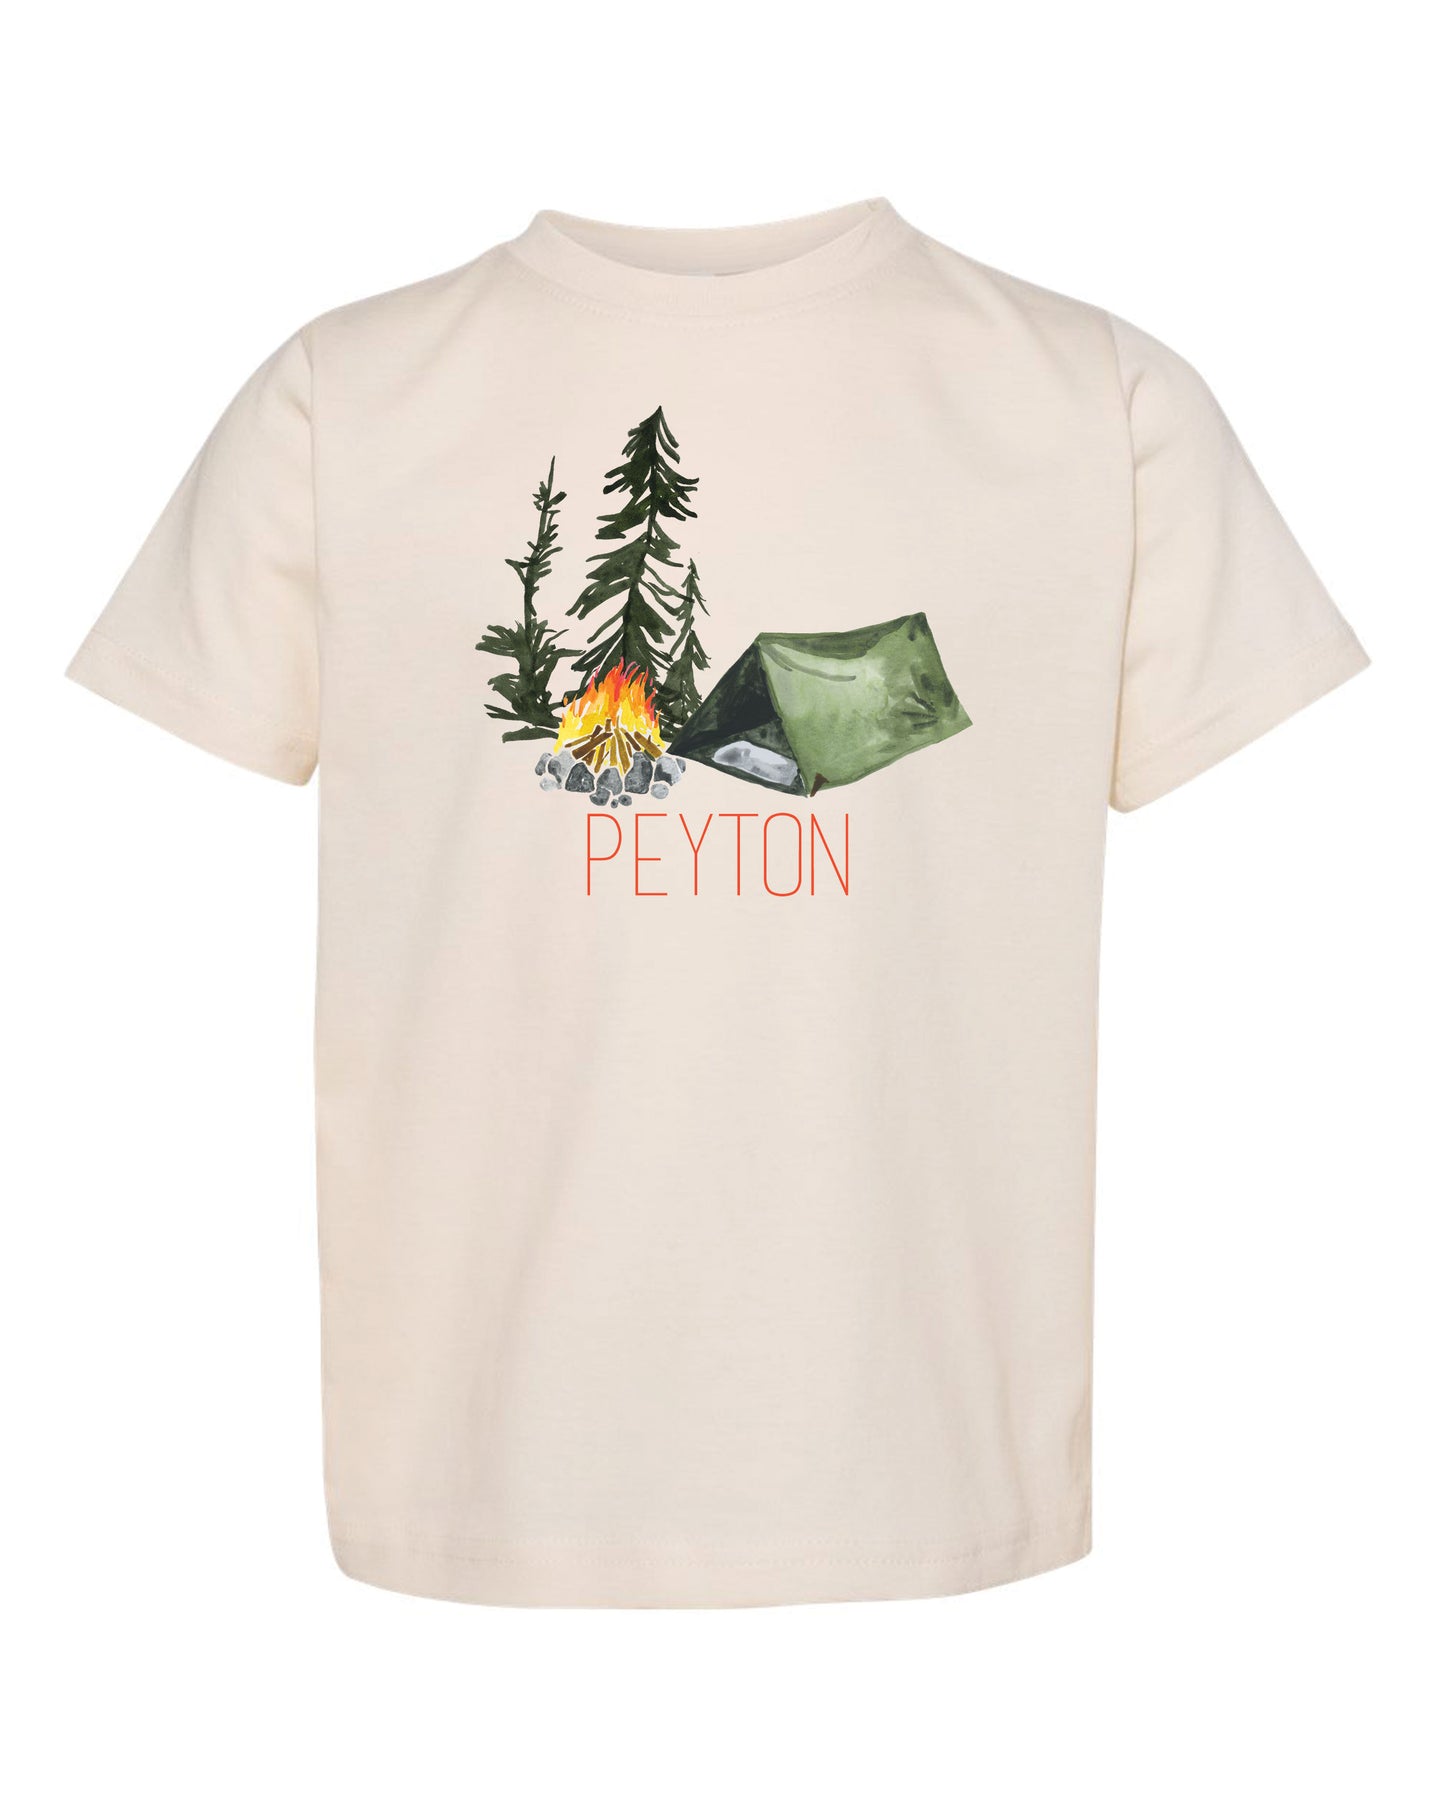 Boys Camping | Kids Tee-Kids Tees-Sister Shirts-Sister Shirts, Cute & Custom Tees for Mama & Littles in Trussville, Alabama.